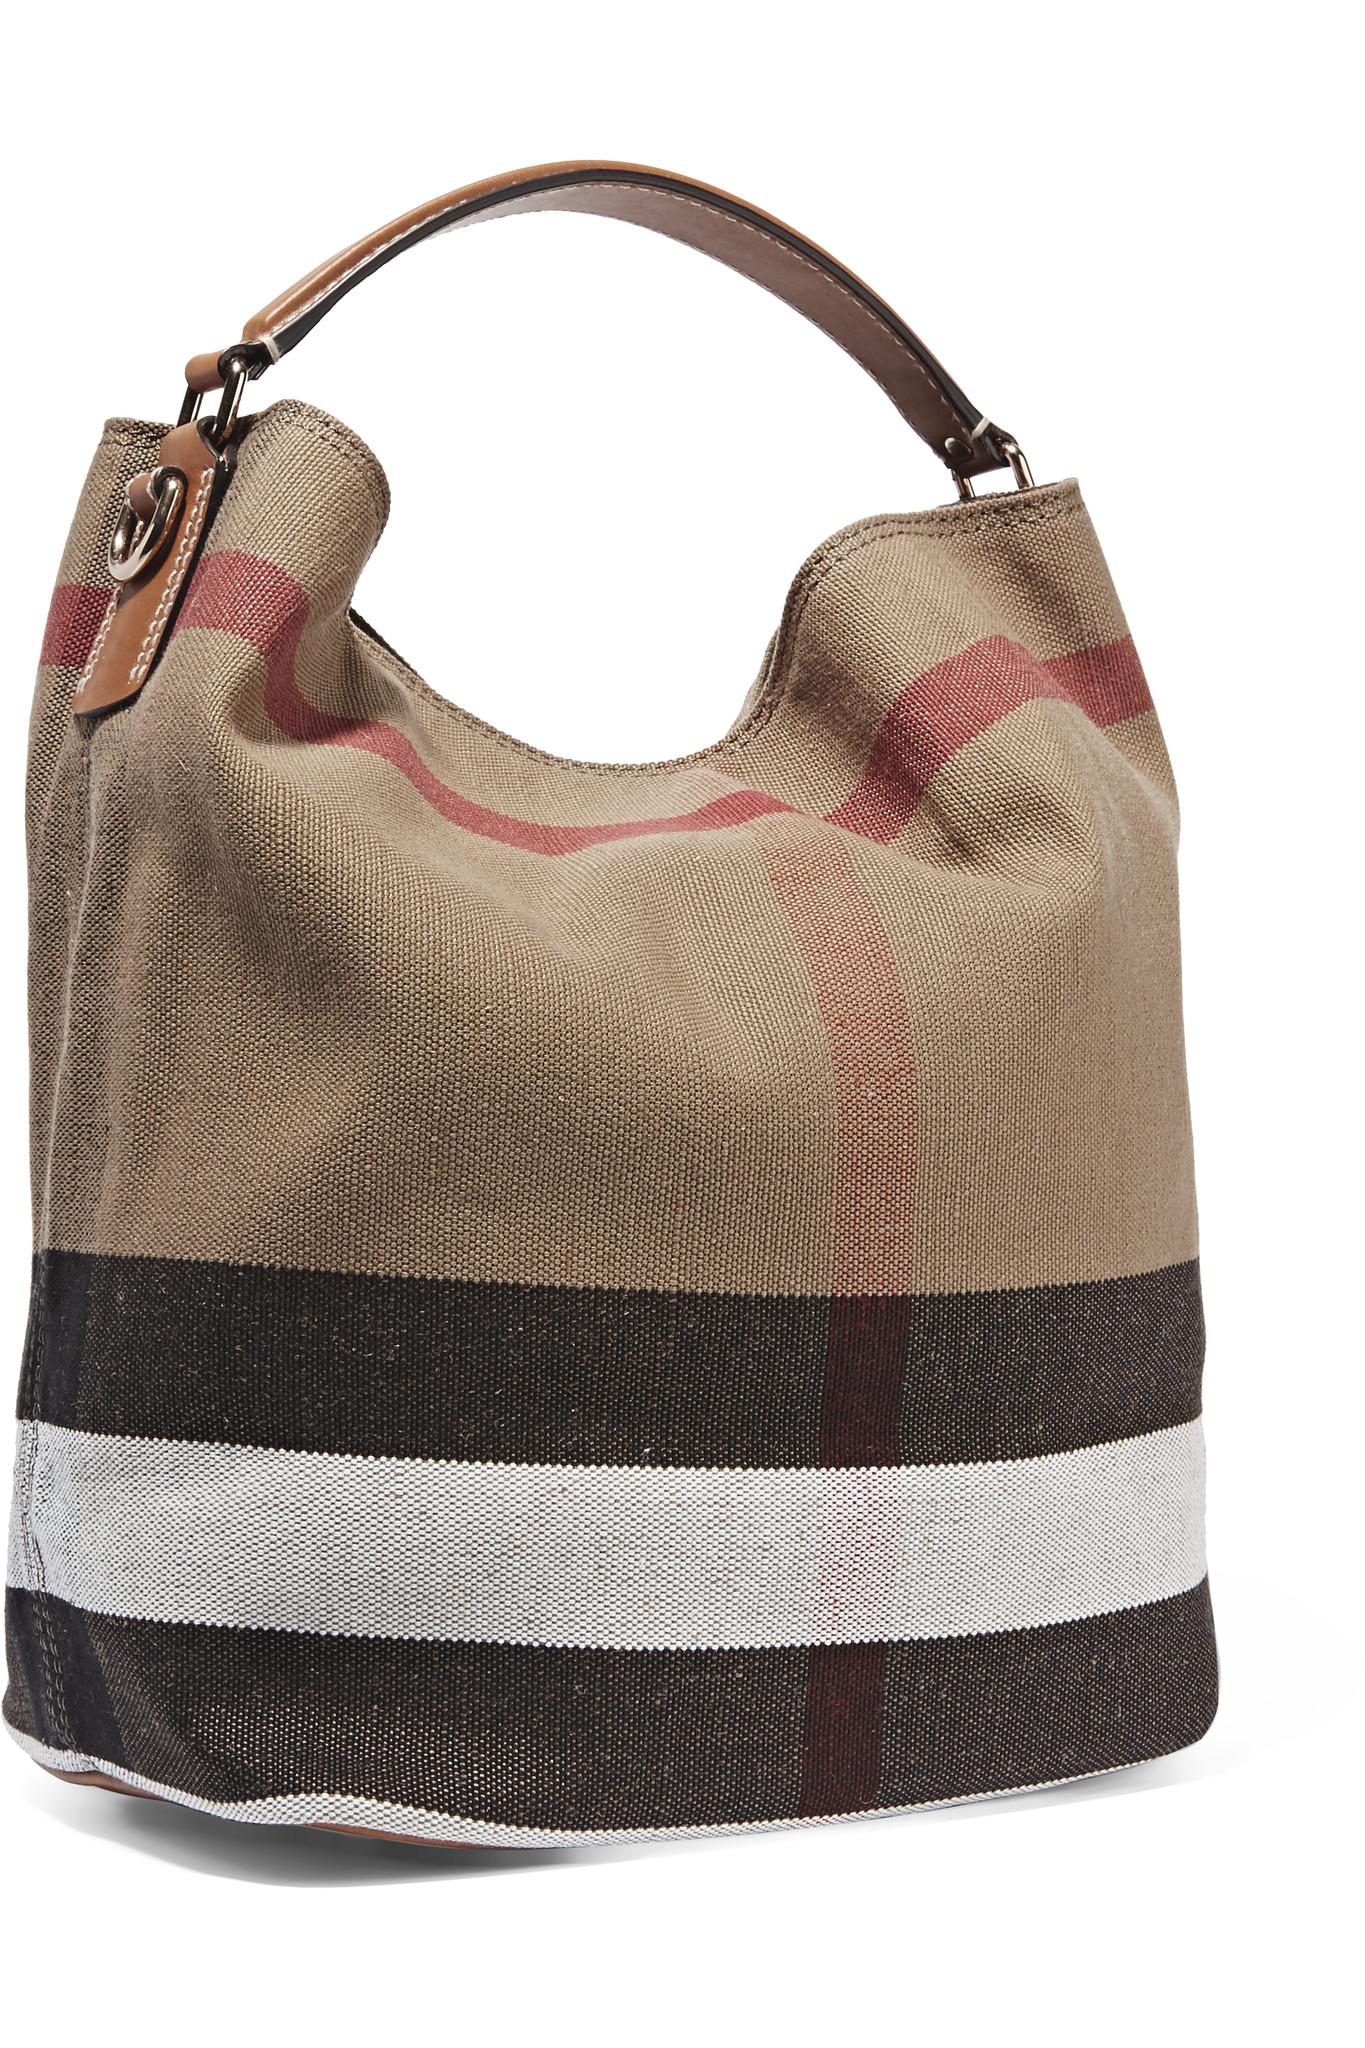 Burberry Leather-trimmed Checked Canvas Hobo Bag in Brown - Lyst